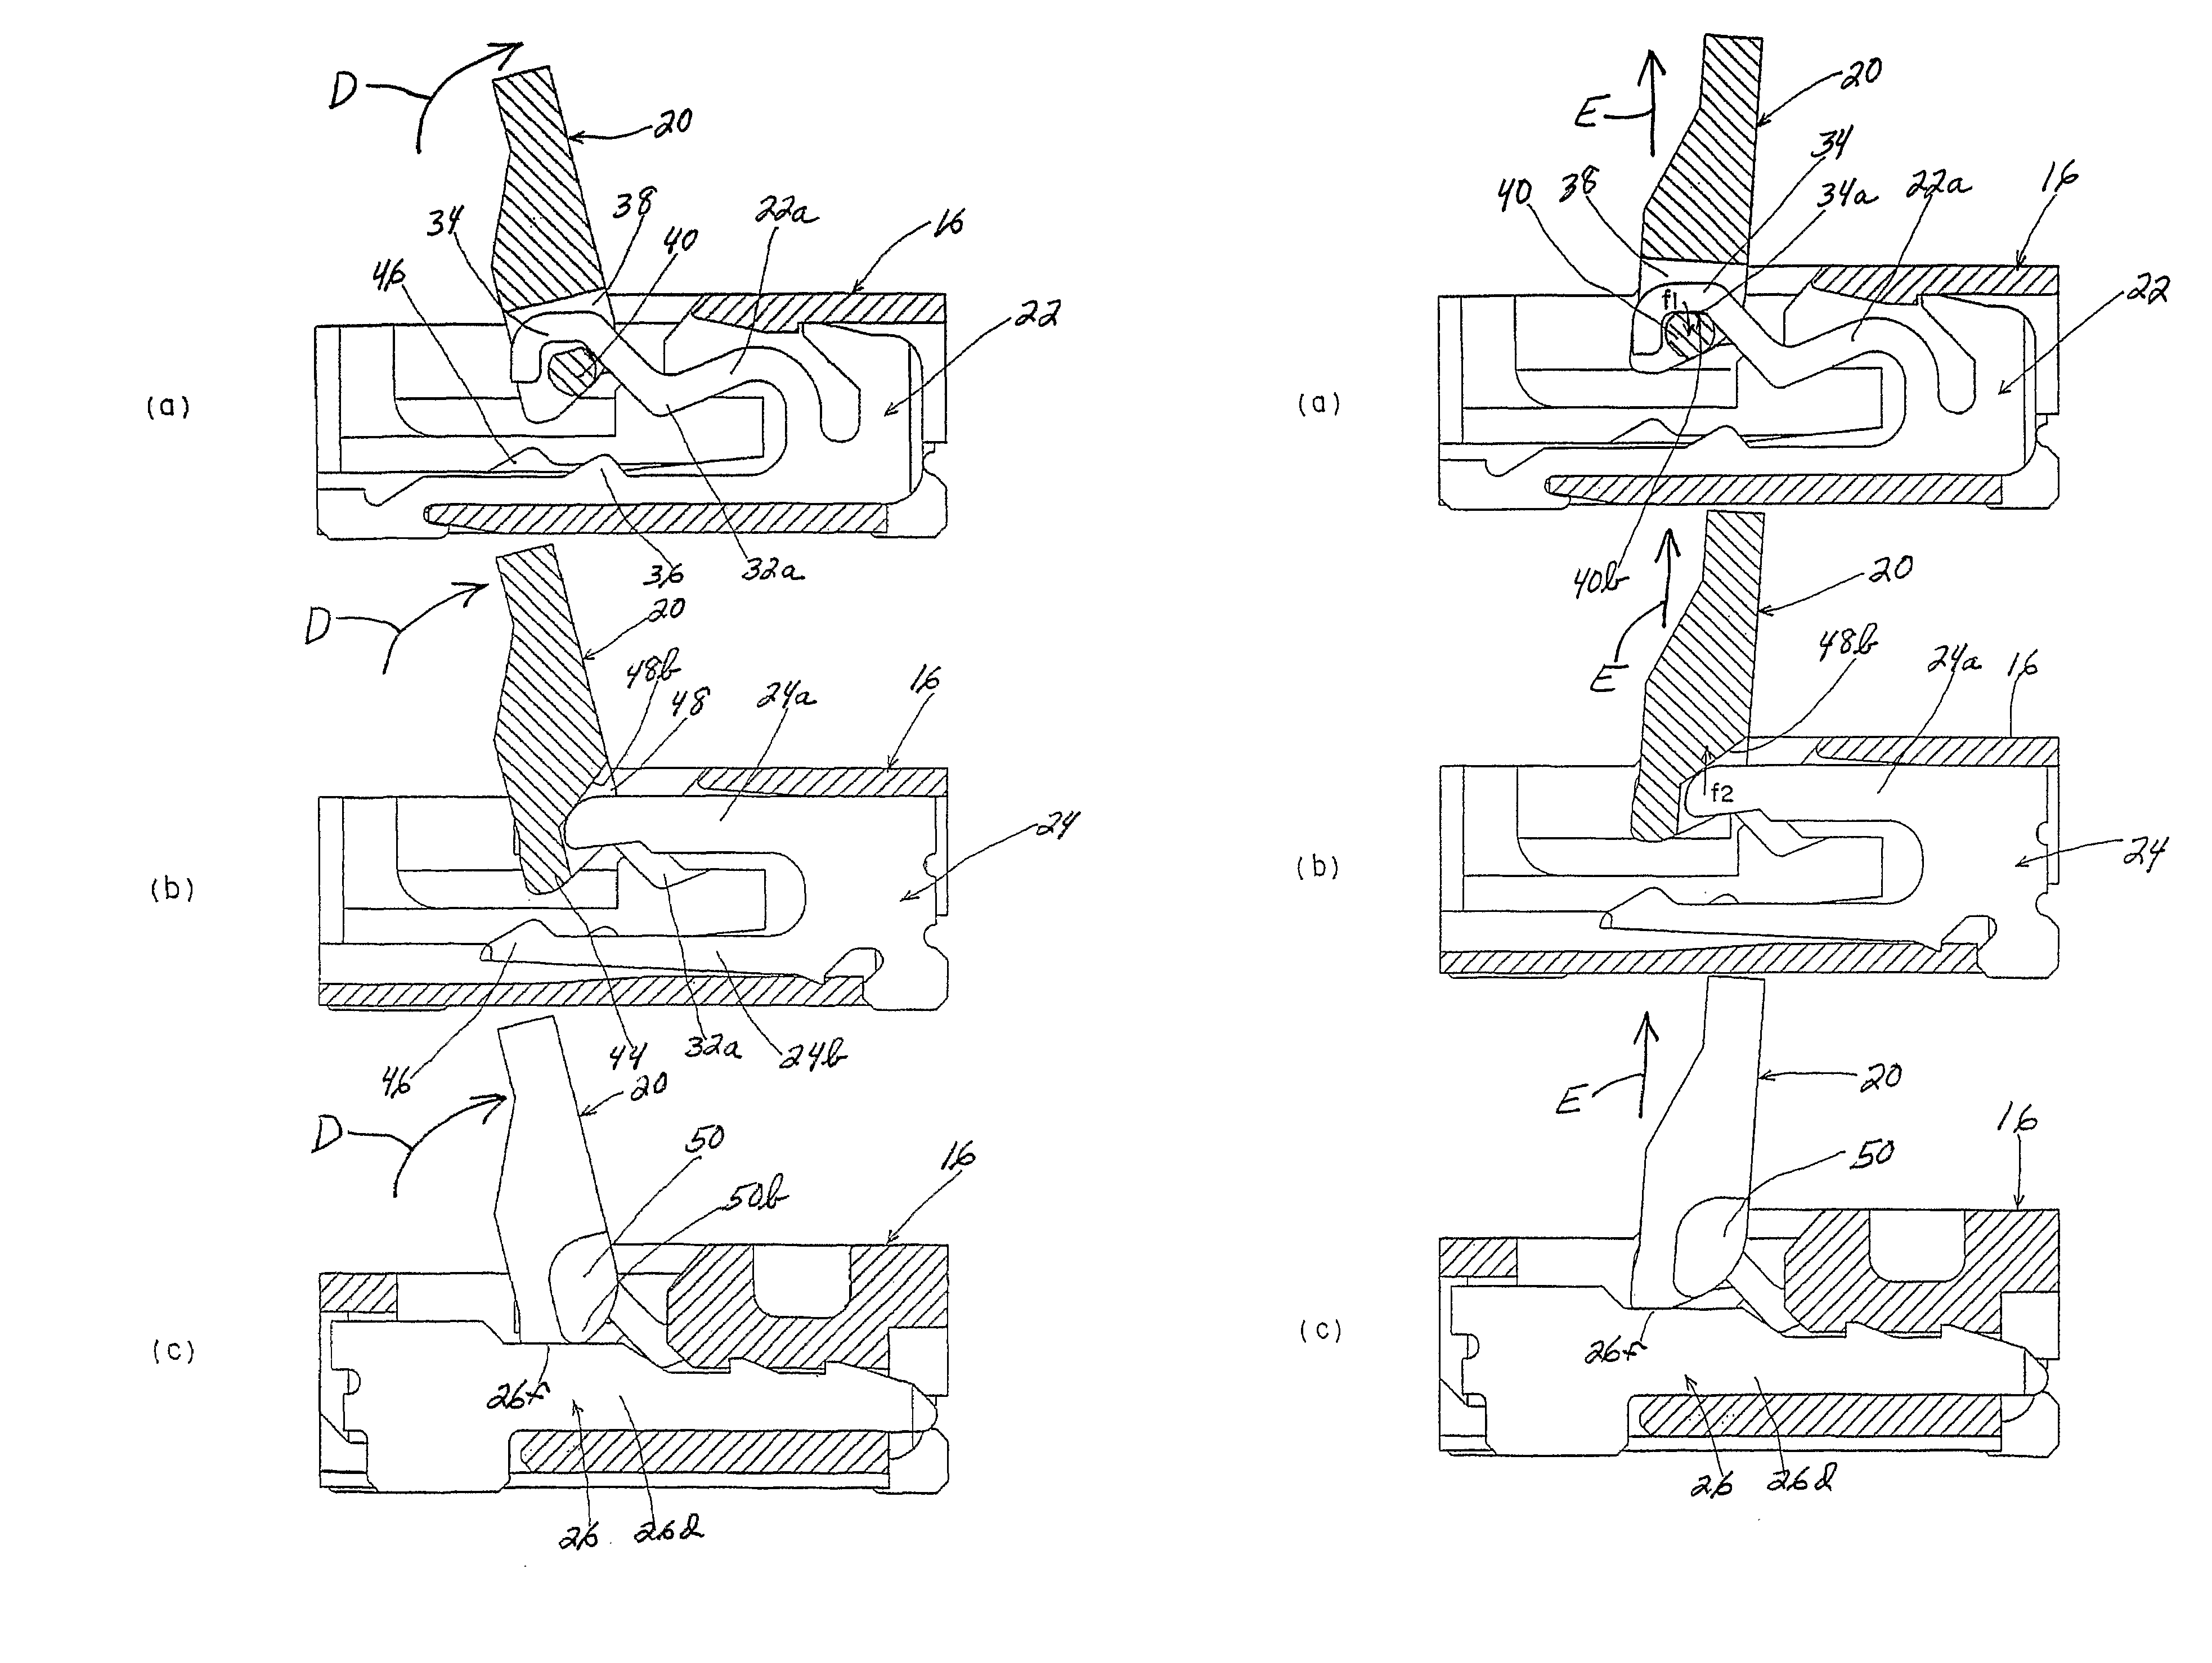 Flat circuit connector with pivoted actuator